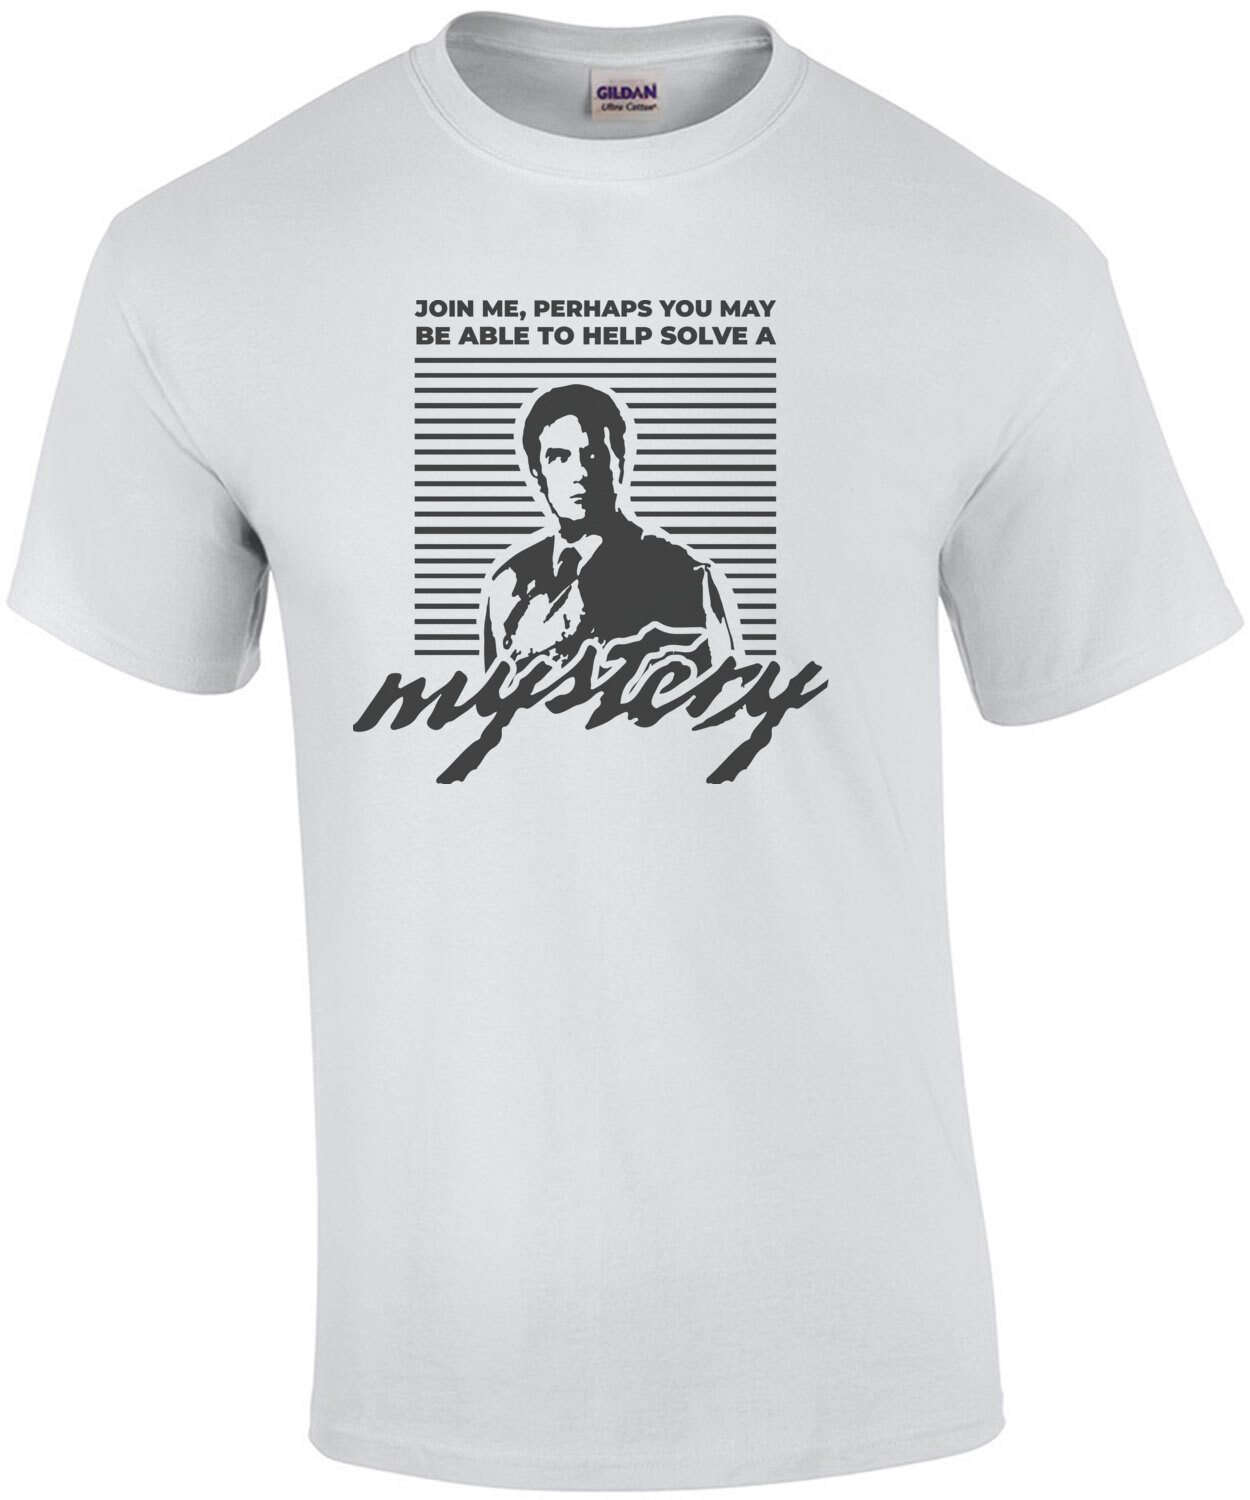 Join me, perhaps you may be able to help solve a mystery - Unsolved Mysteries 80's T-Shirt